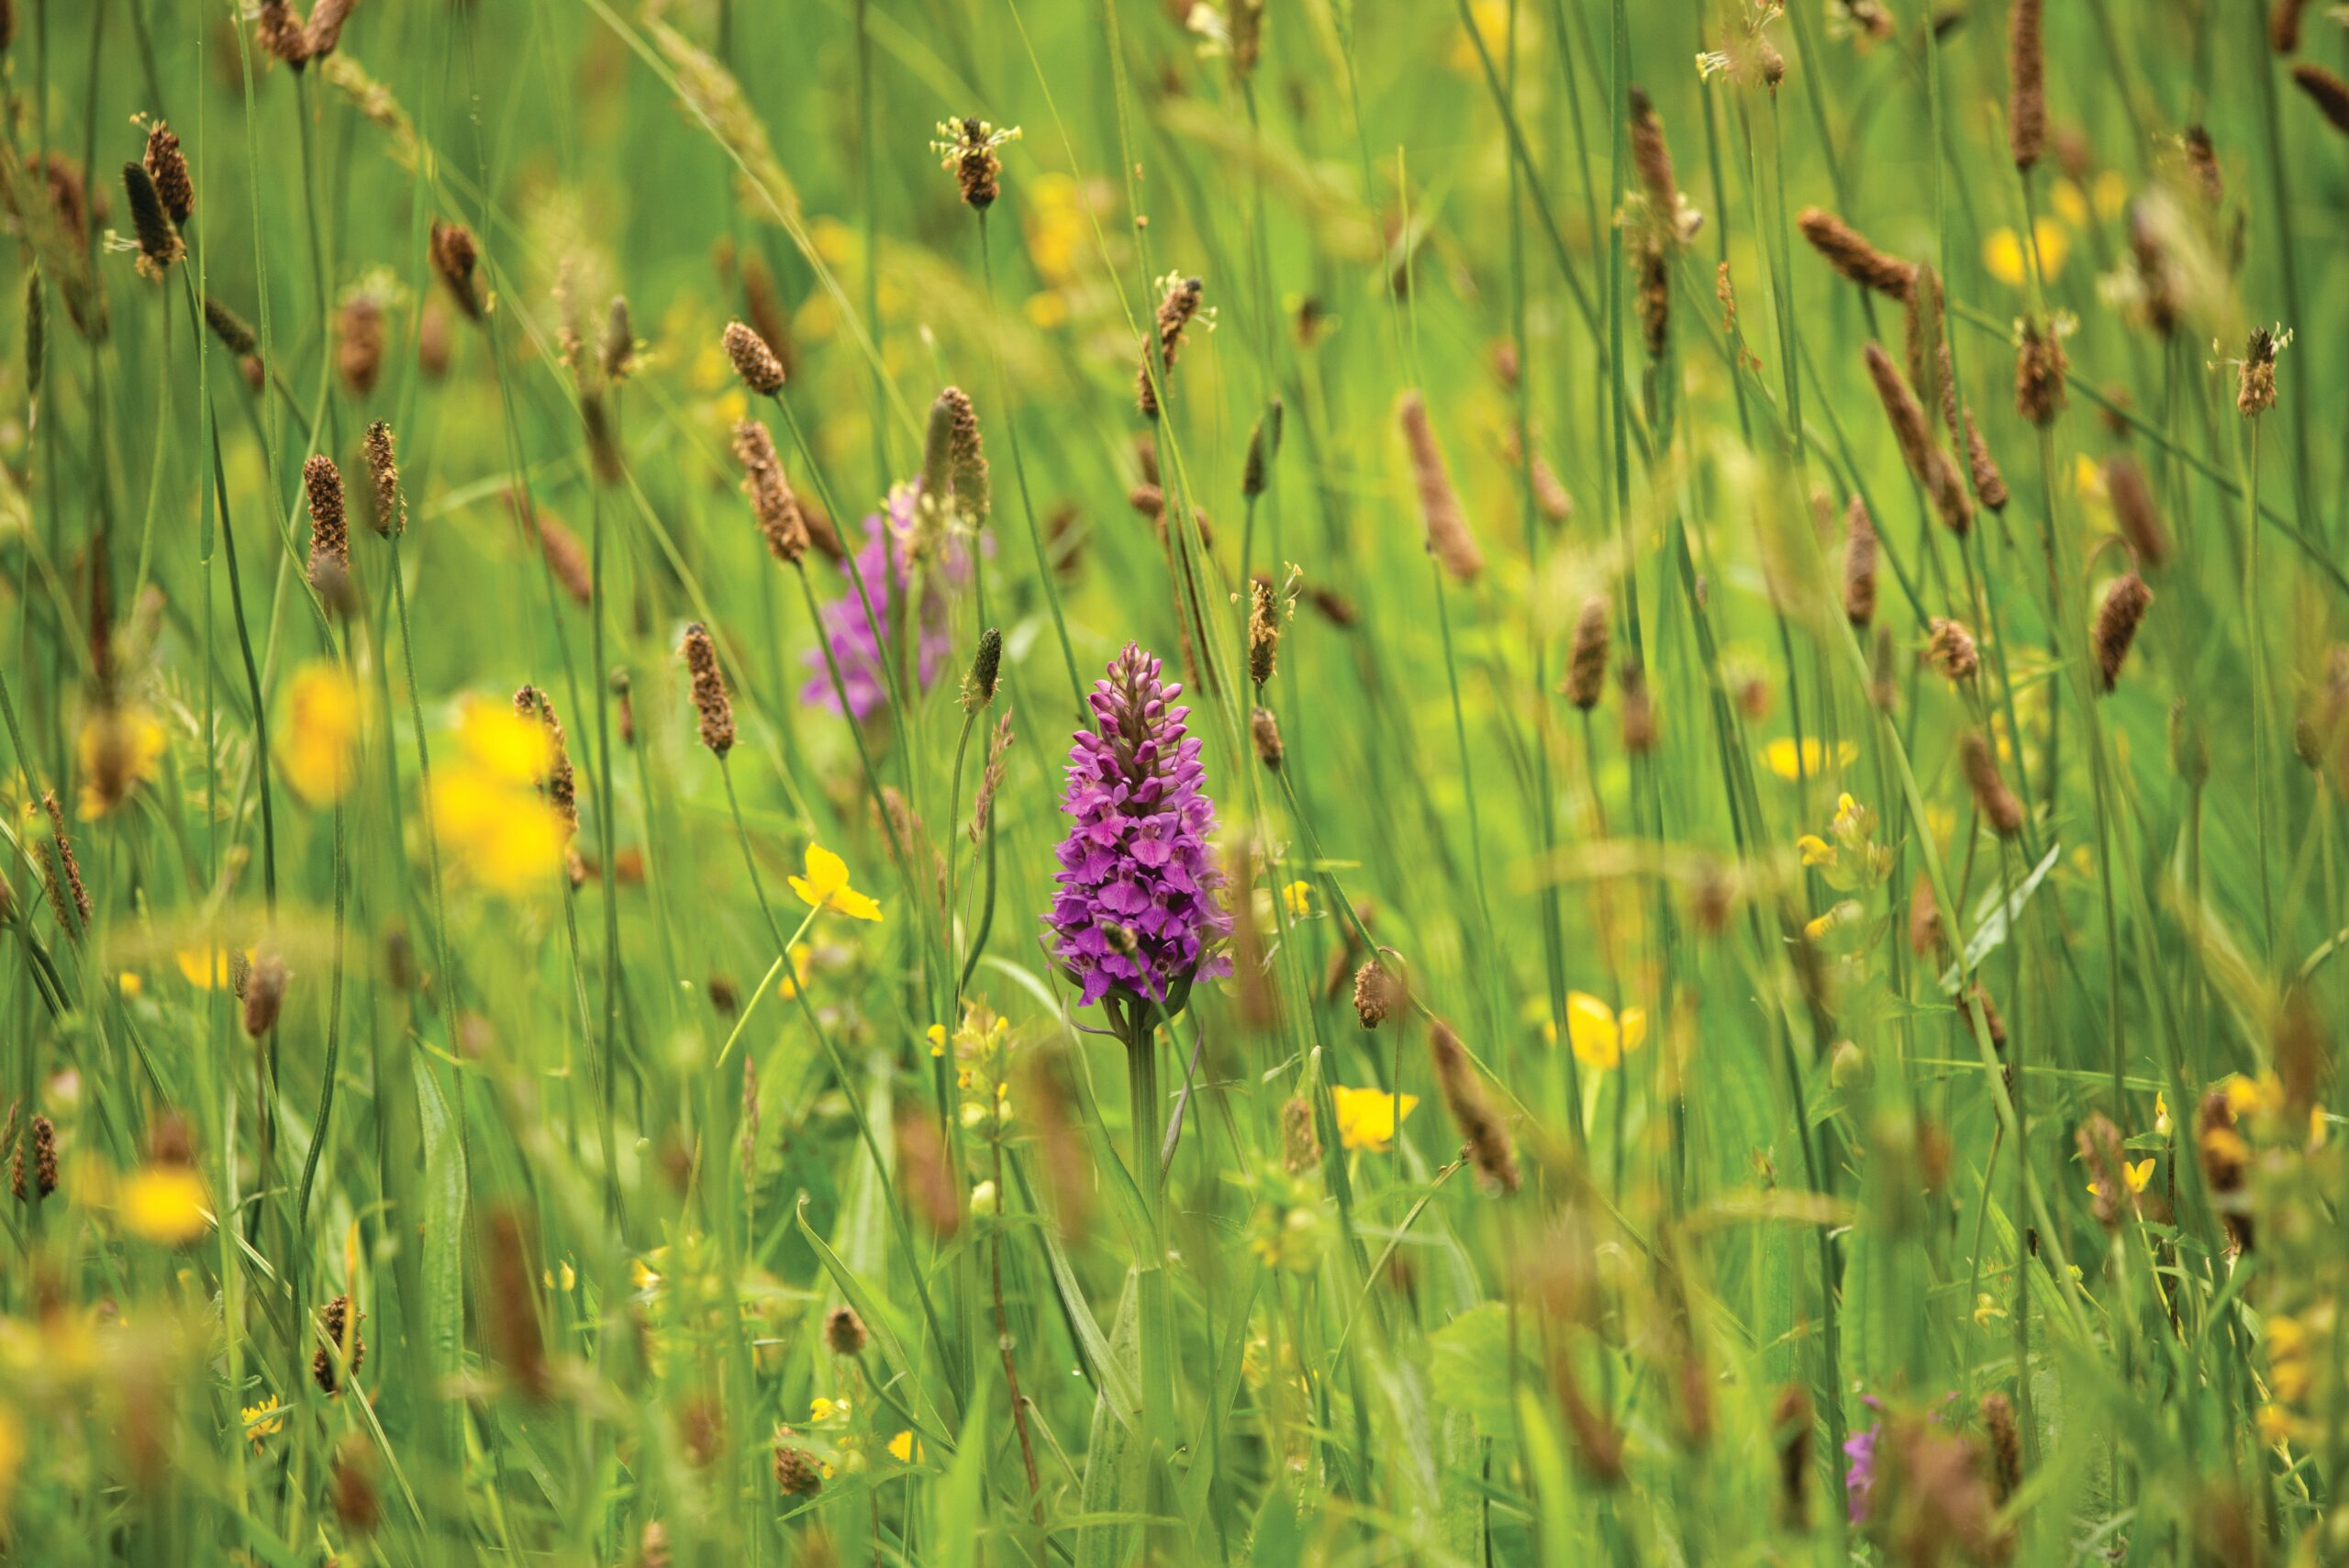 Marsh Orchid photograph in a meadow with other flowers taken from ground level.